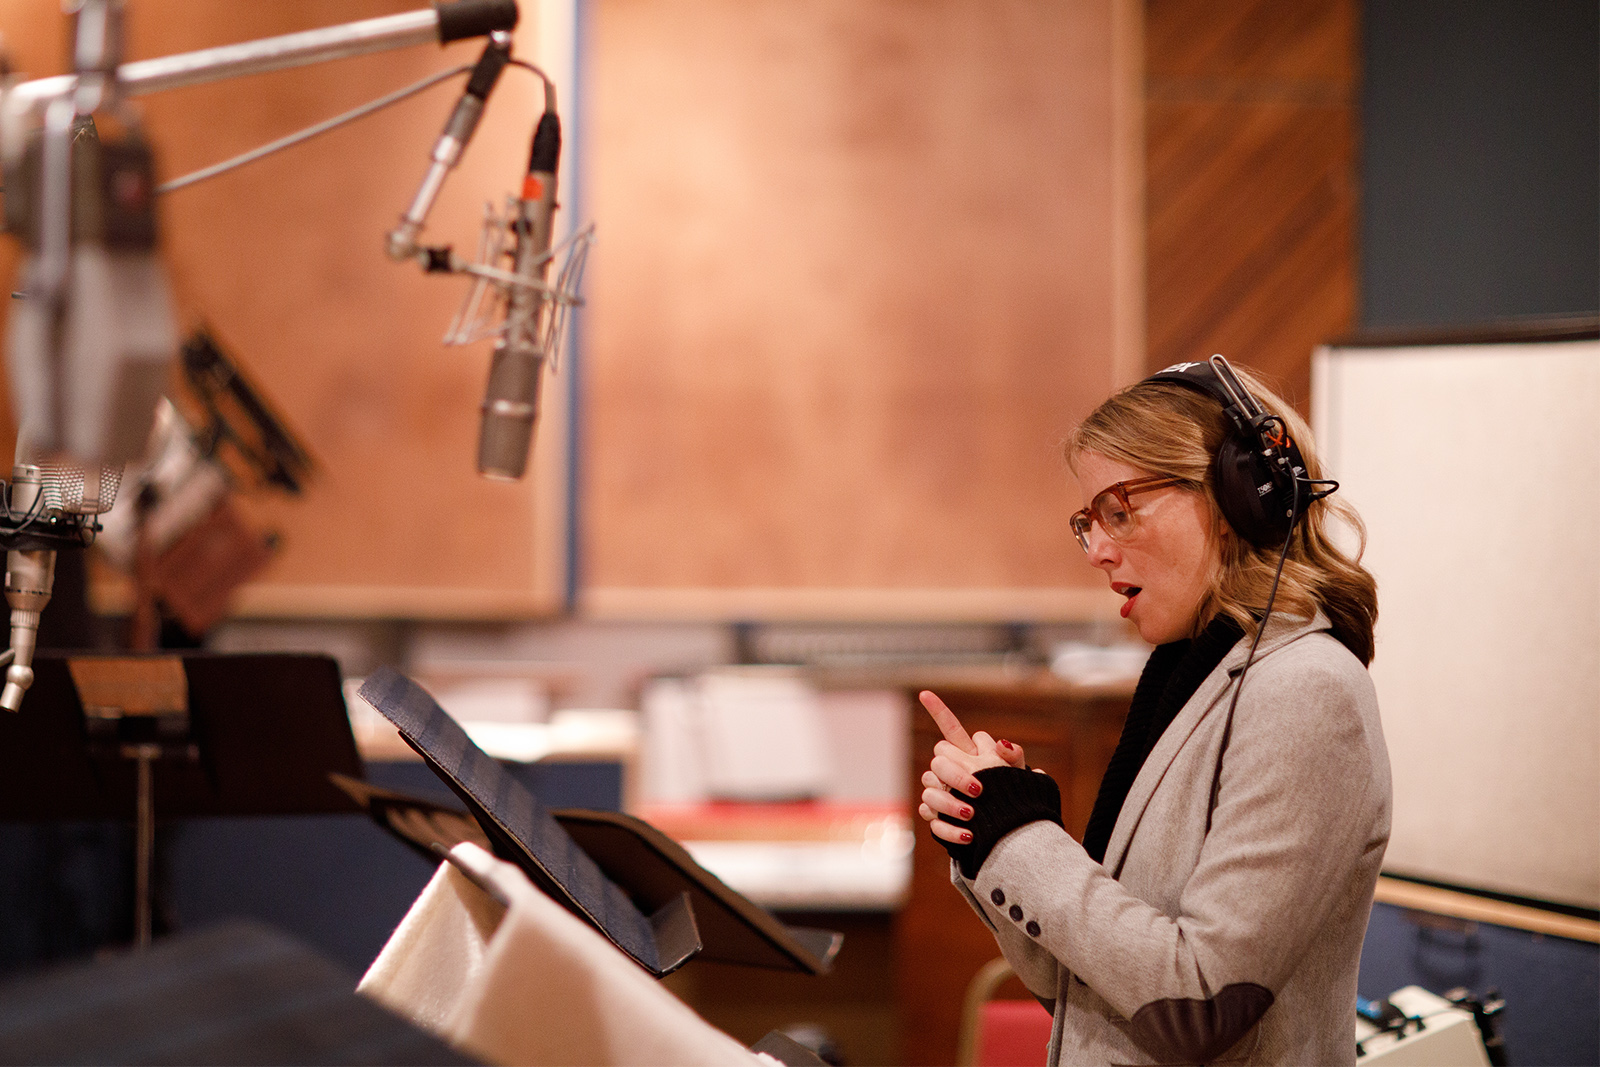 Morgan James records the part of Jesus Christ in the studio for “Jesus Christ Superstar: Highlights From the All-Female Studio Cast Recording." Photo by Kat Hennessey